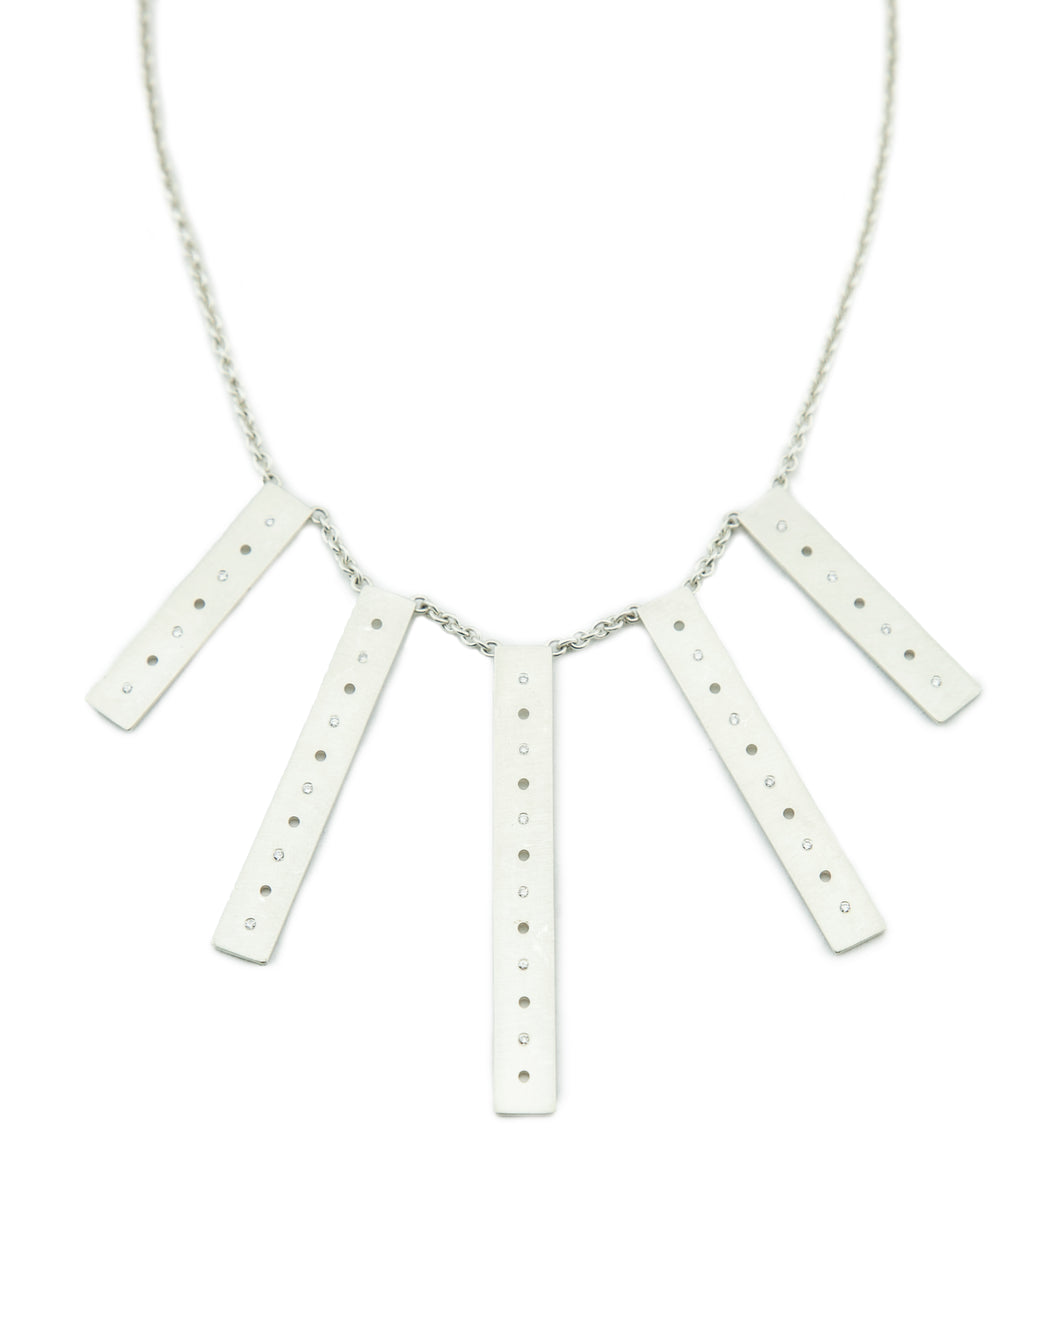 Clean and sleek, sterling silver and diamond bar statement necklace.   Size: Bars vary from 40mm-60mm long; 8mm width; 18